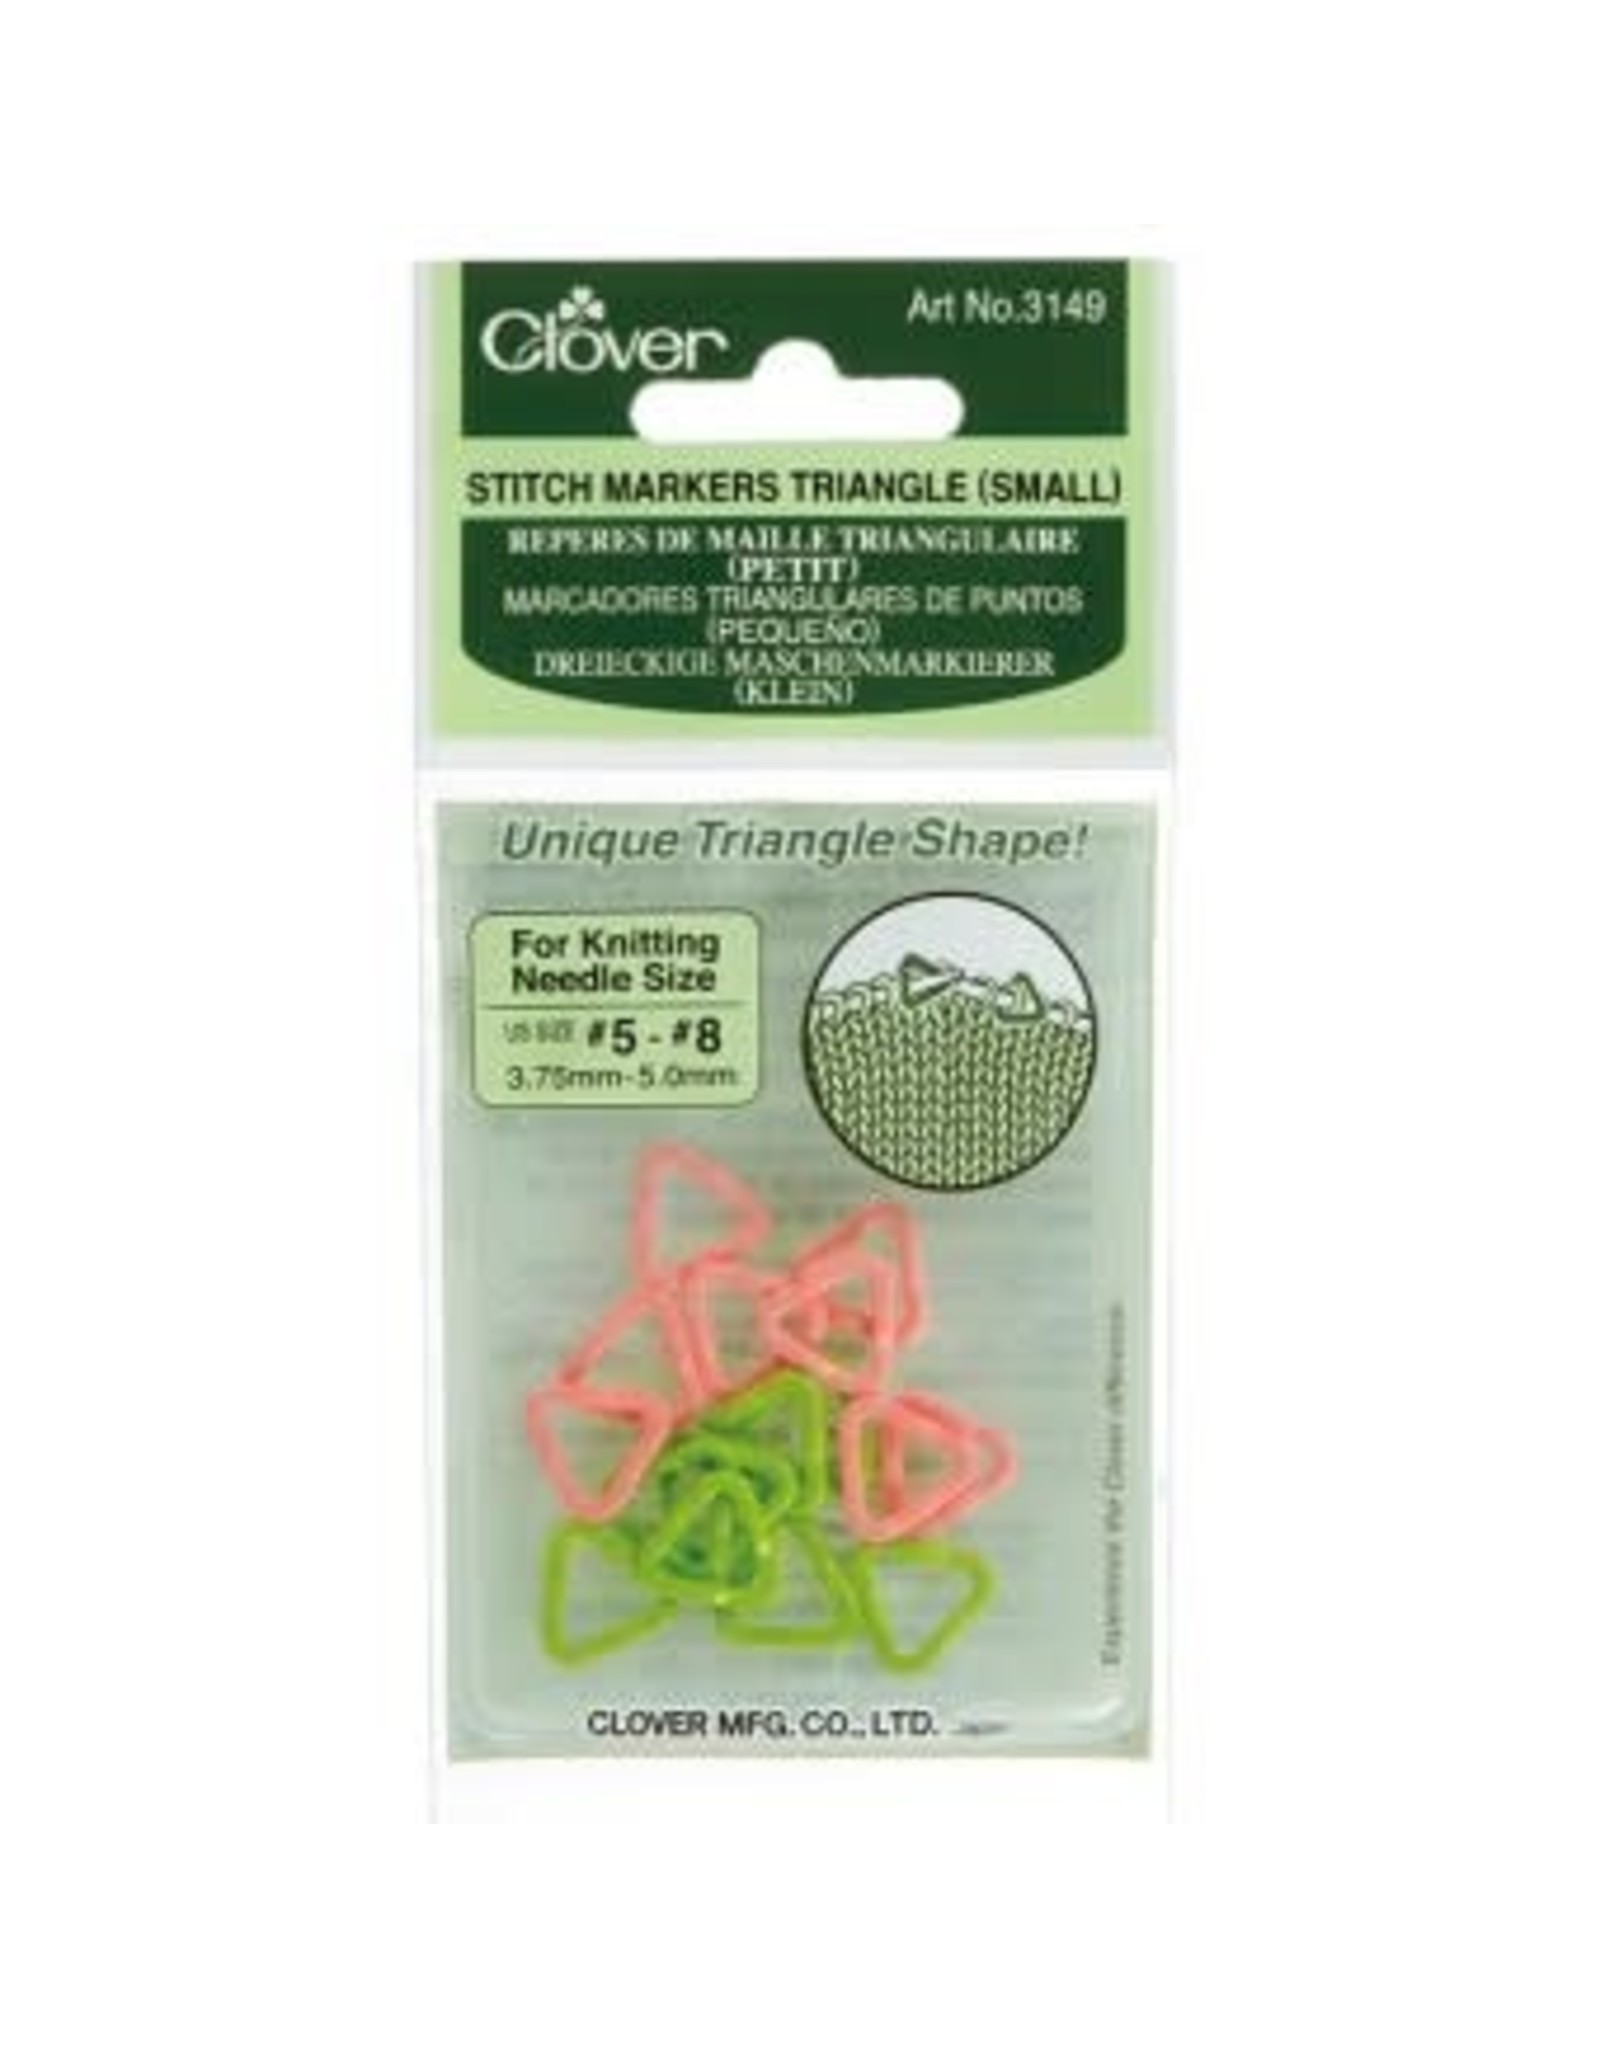 Clover Clover Stitch Markers Triangle Small 3149